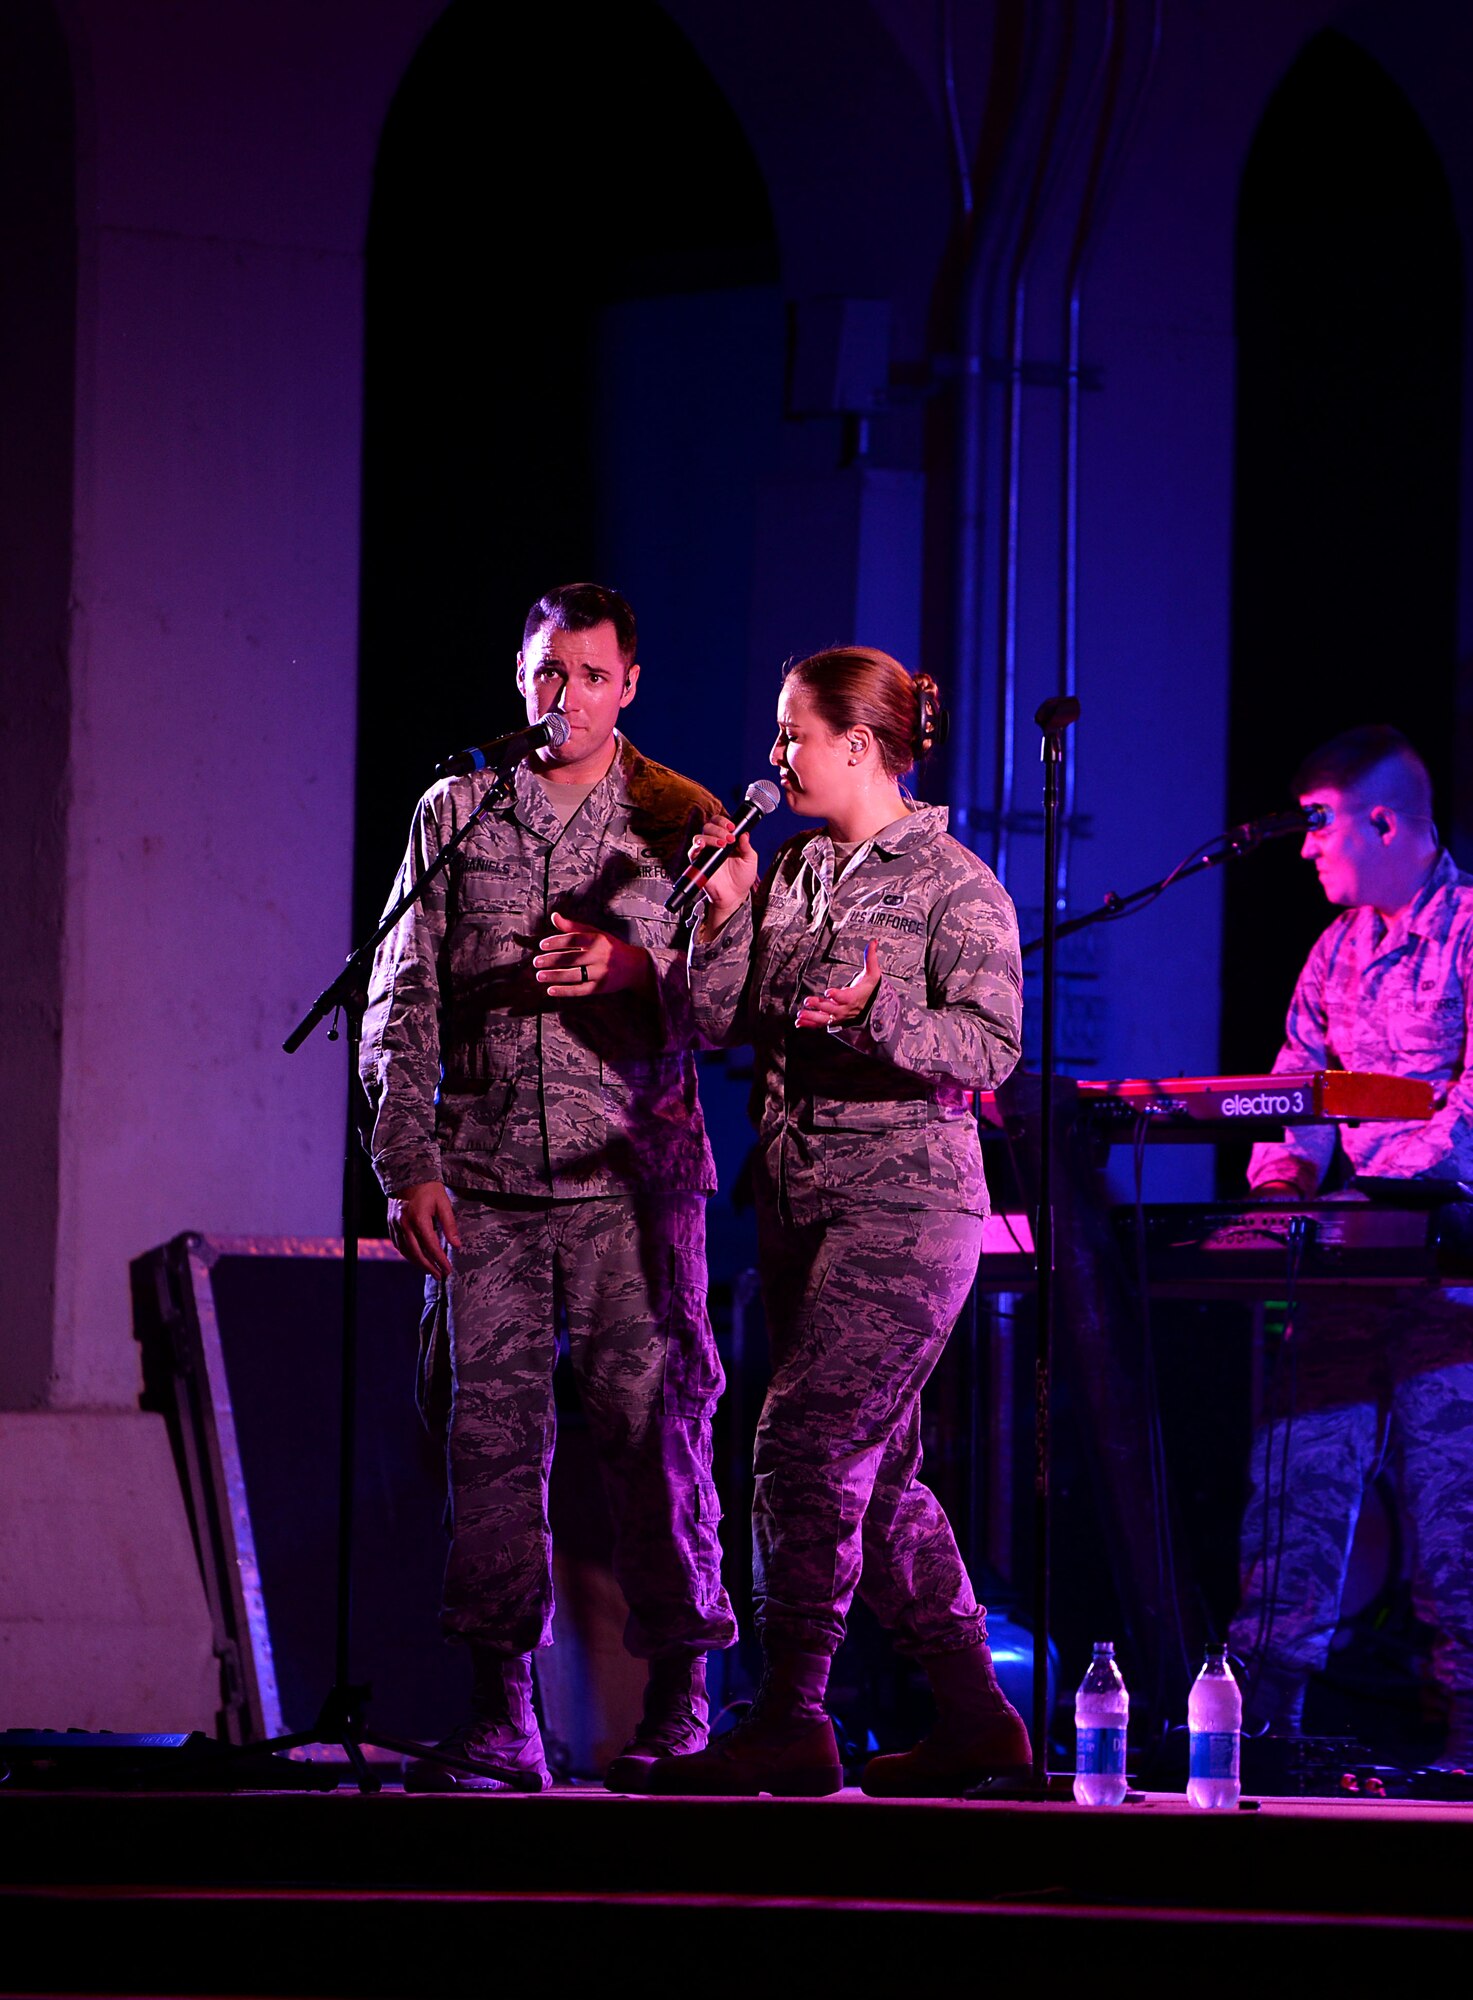 Airman 1st Class Courtney Woods and Tech. Sgt. Nick Daniels, U.S. Air Force Band of the West’s Top Flight vocalists, sing together during the Top Flight concert at the Columbus Riverwalk Stage Sept. 27, 2019, in Columbus, Miss. Members of Top Flight include Woods and Daniels on vocals, Tech. Sgt. Greg Lacy on guitar, Tech. Sgt. Troy Griffin on drums, Master Sgt. Mark Frandsen on bass, and Master Sgt. Nick Wellman as the audio engineer. (U.S. Air Force photo by Airman 1st Class Hannah Bean)